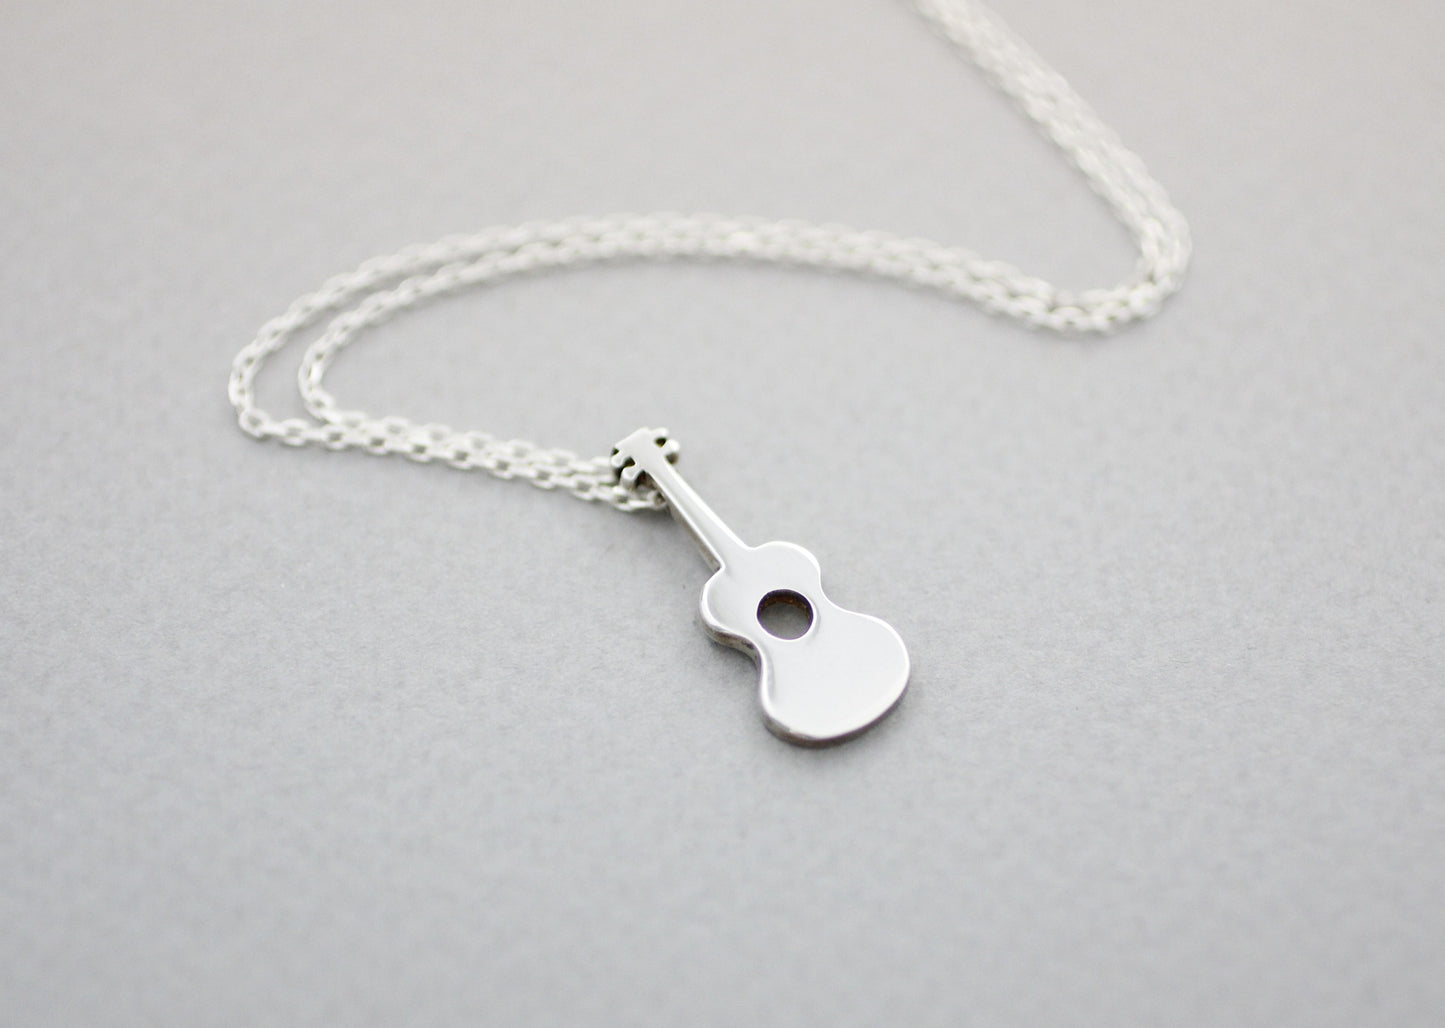 925 Sterling Silver Acoustic Guitar Charm Necklace, Musician Necklace, Music Instrument Necklace